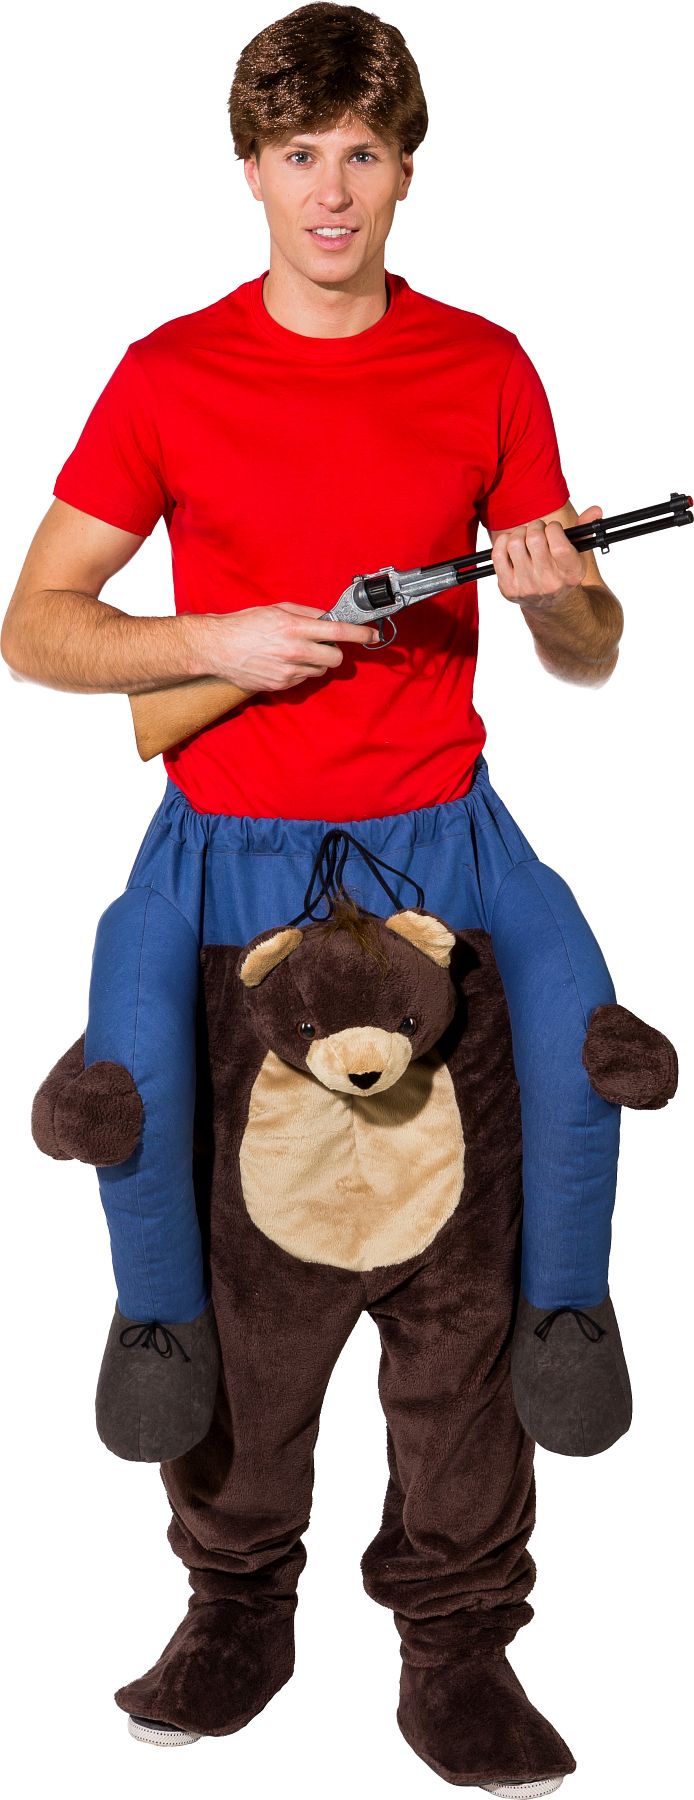 Costume d'ours ferroutage